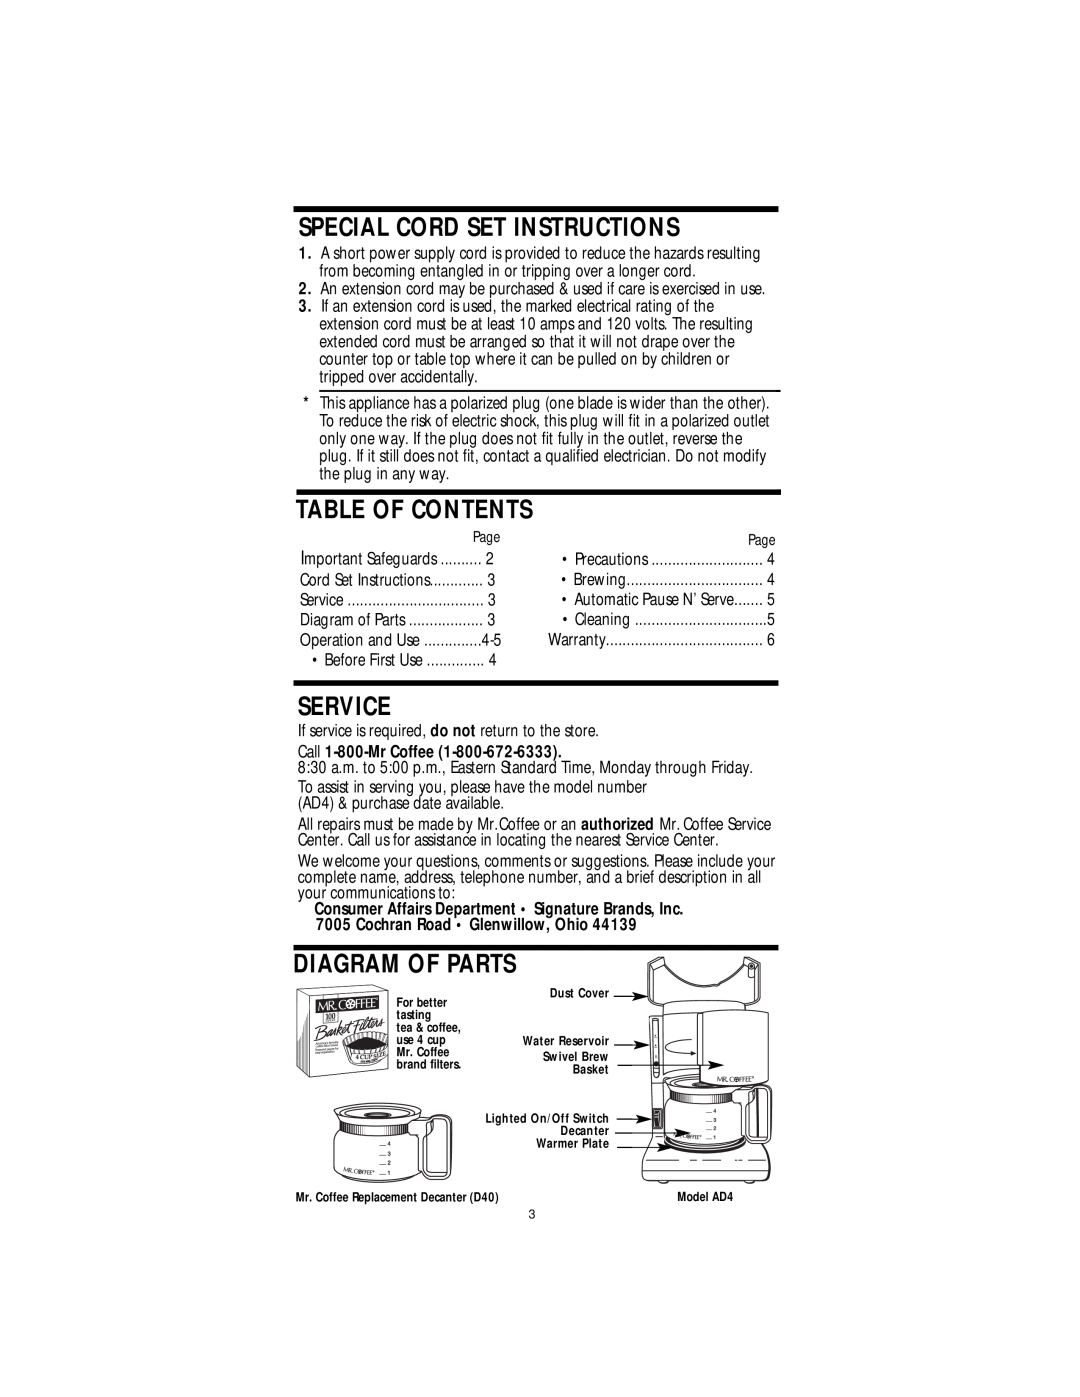 Mr. Coffee AD SERIES operating instructions Special Cord Set Instructions, Table Of Contents, Service, Diagram Of Parts 